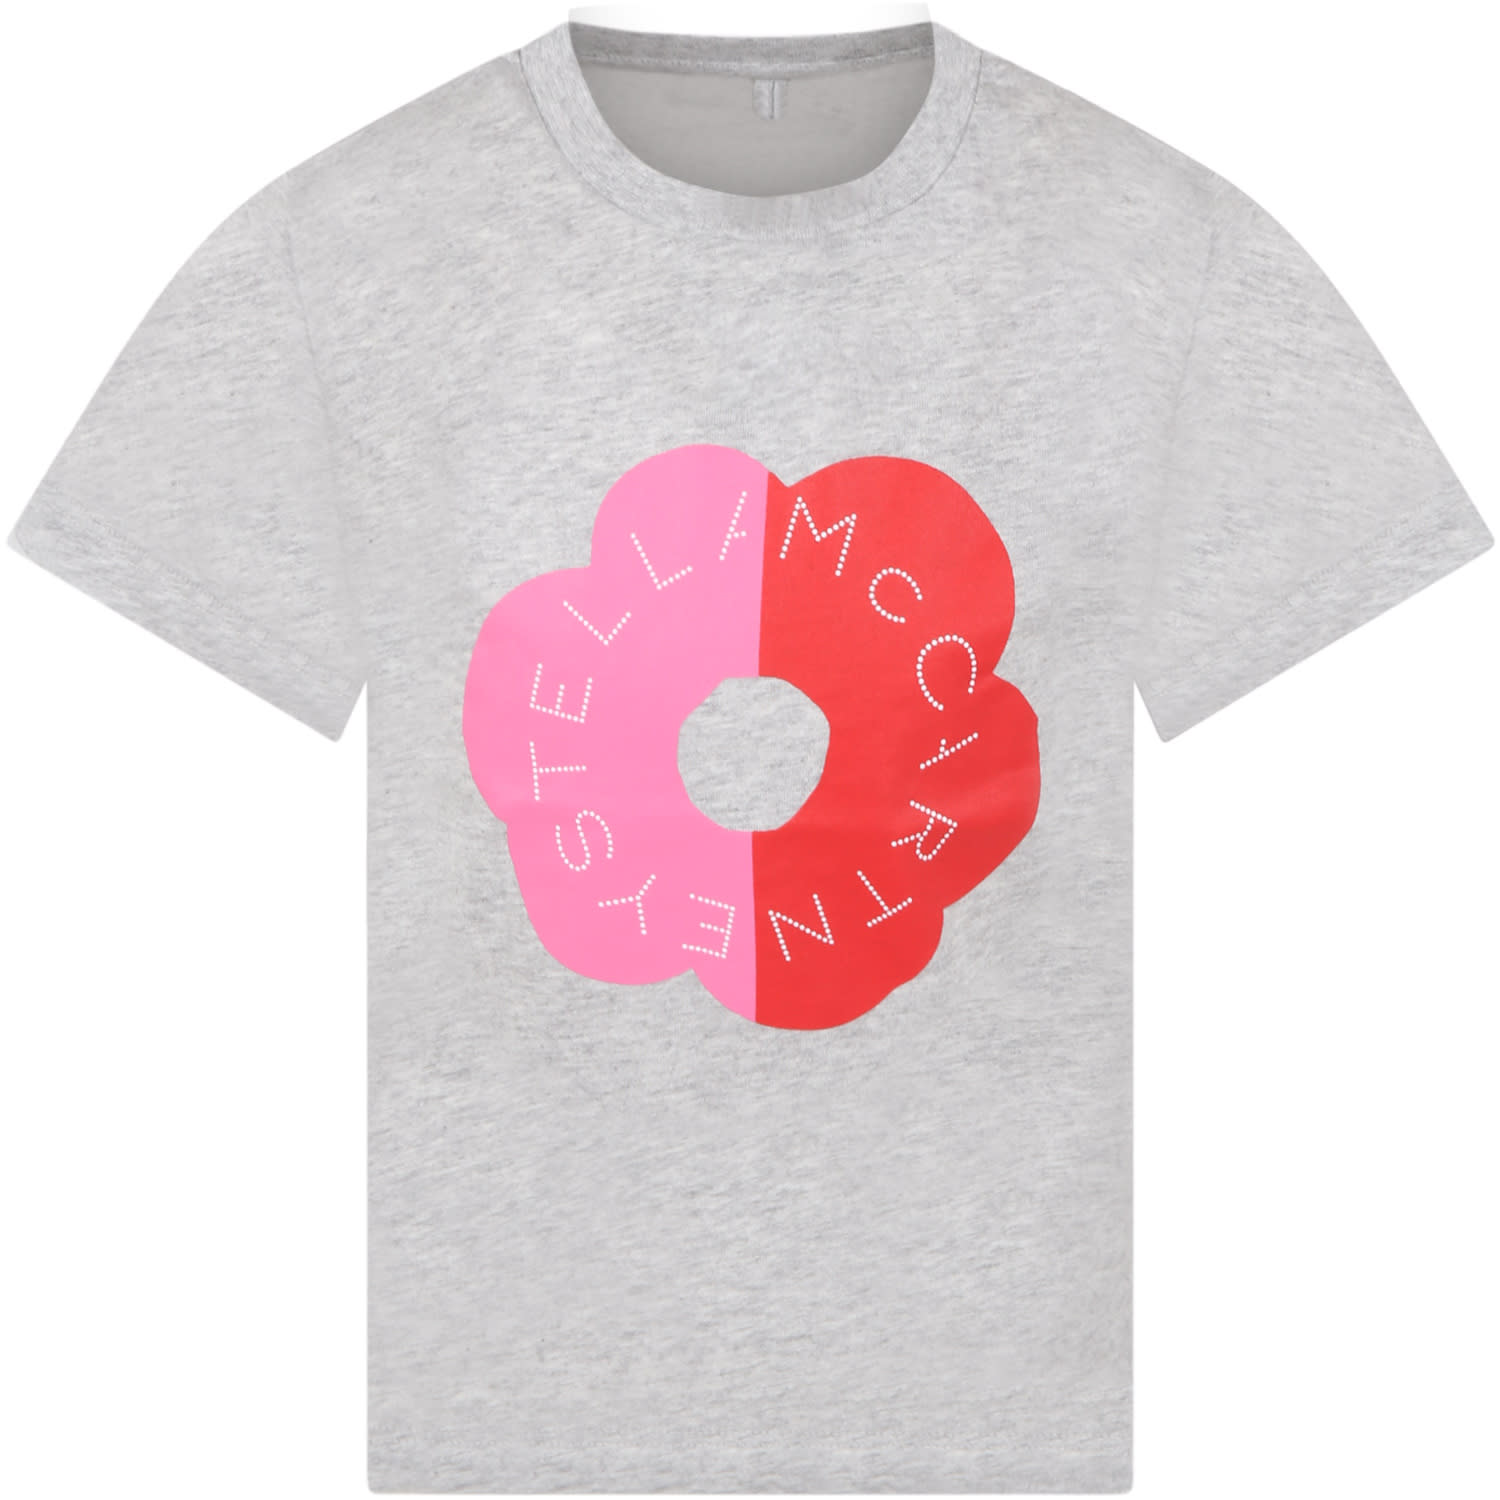 STELLA MCCARTNEY GRAY T-SHIRT FOR GIRL WITH FLOWER AND LOGO